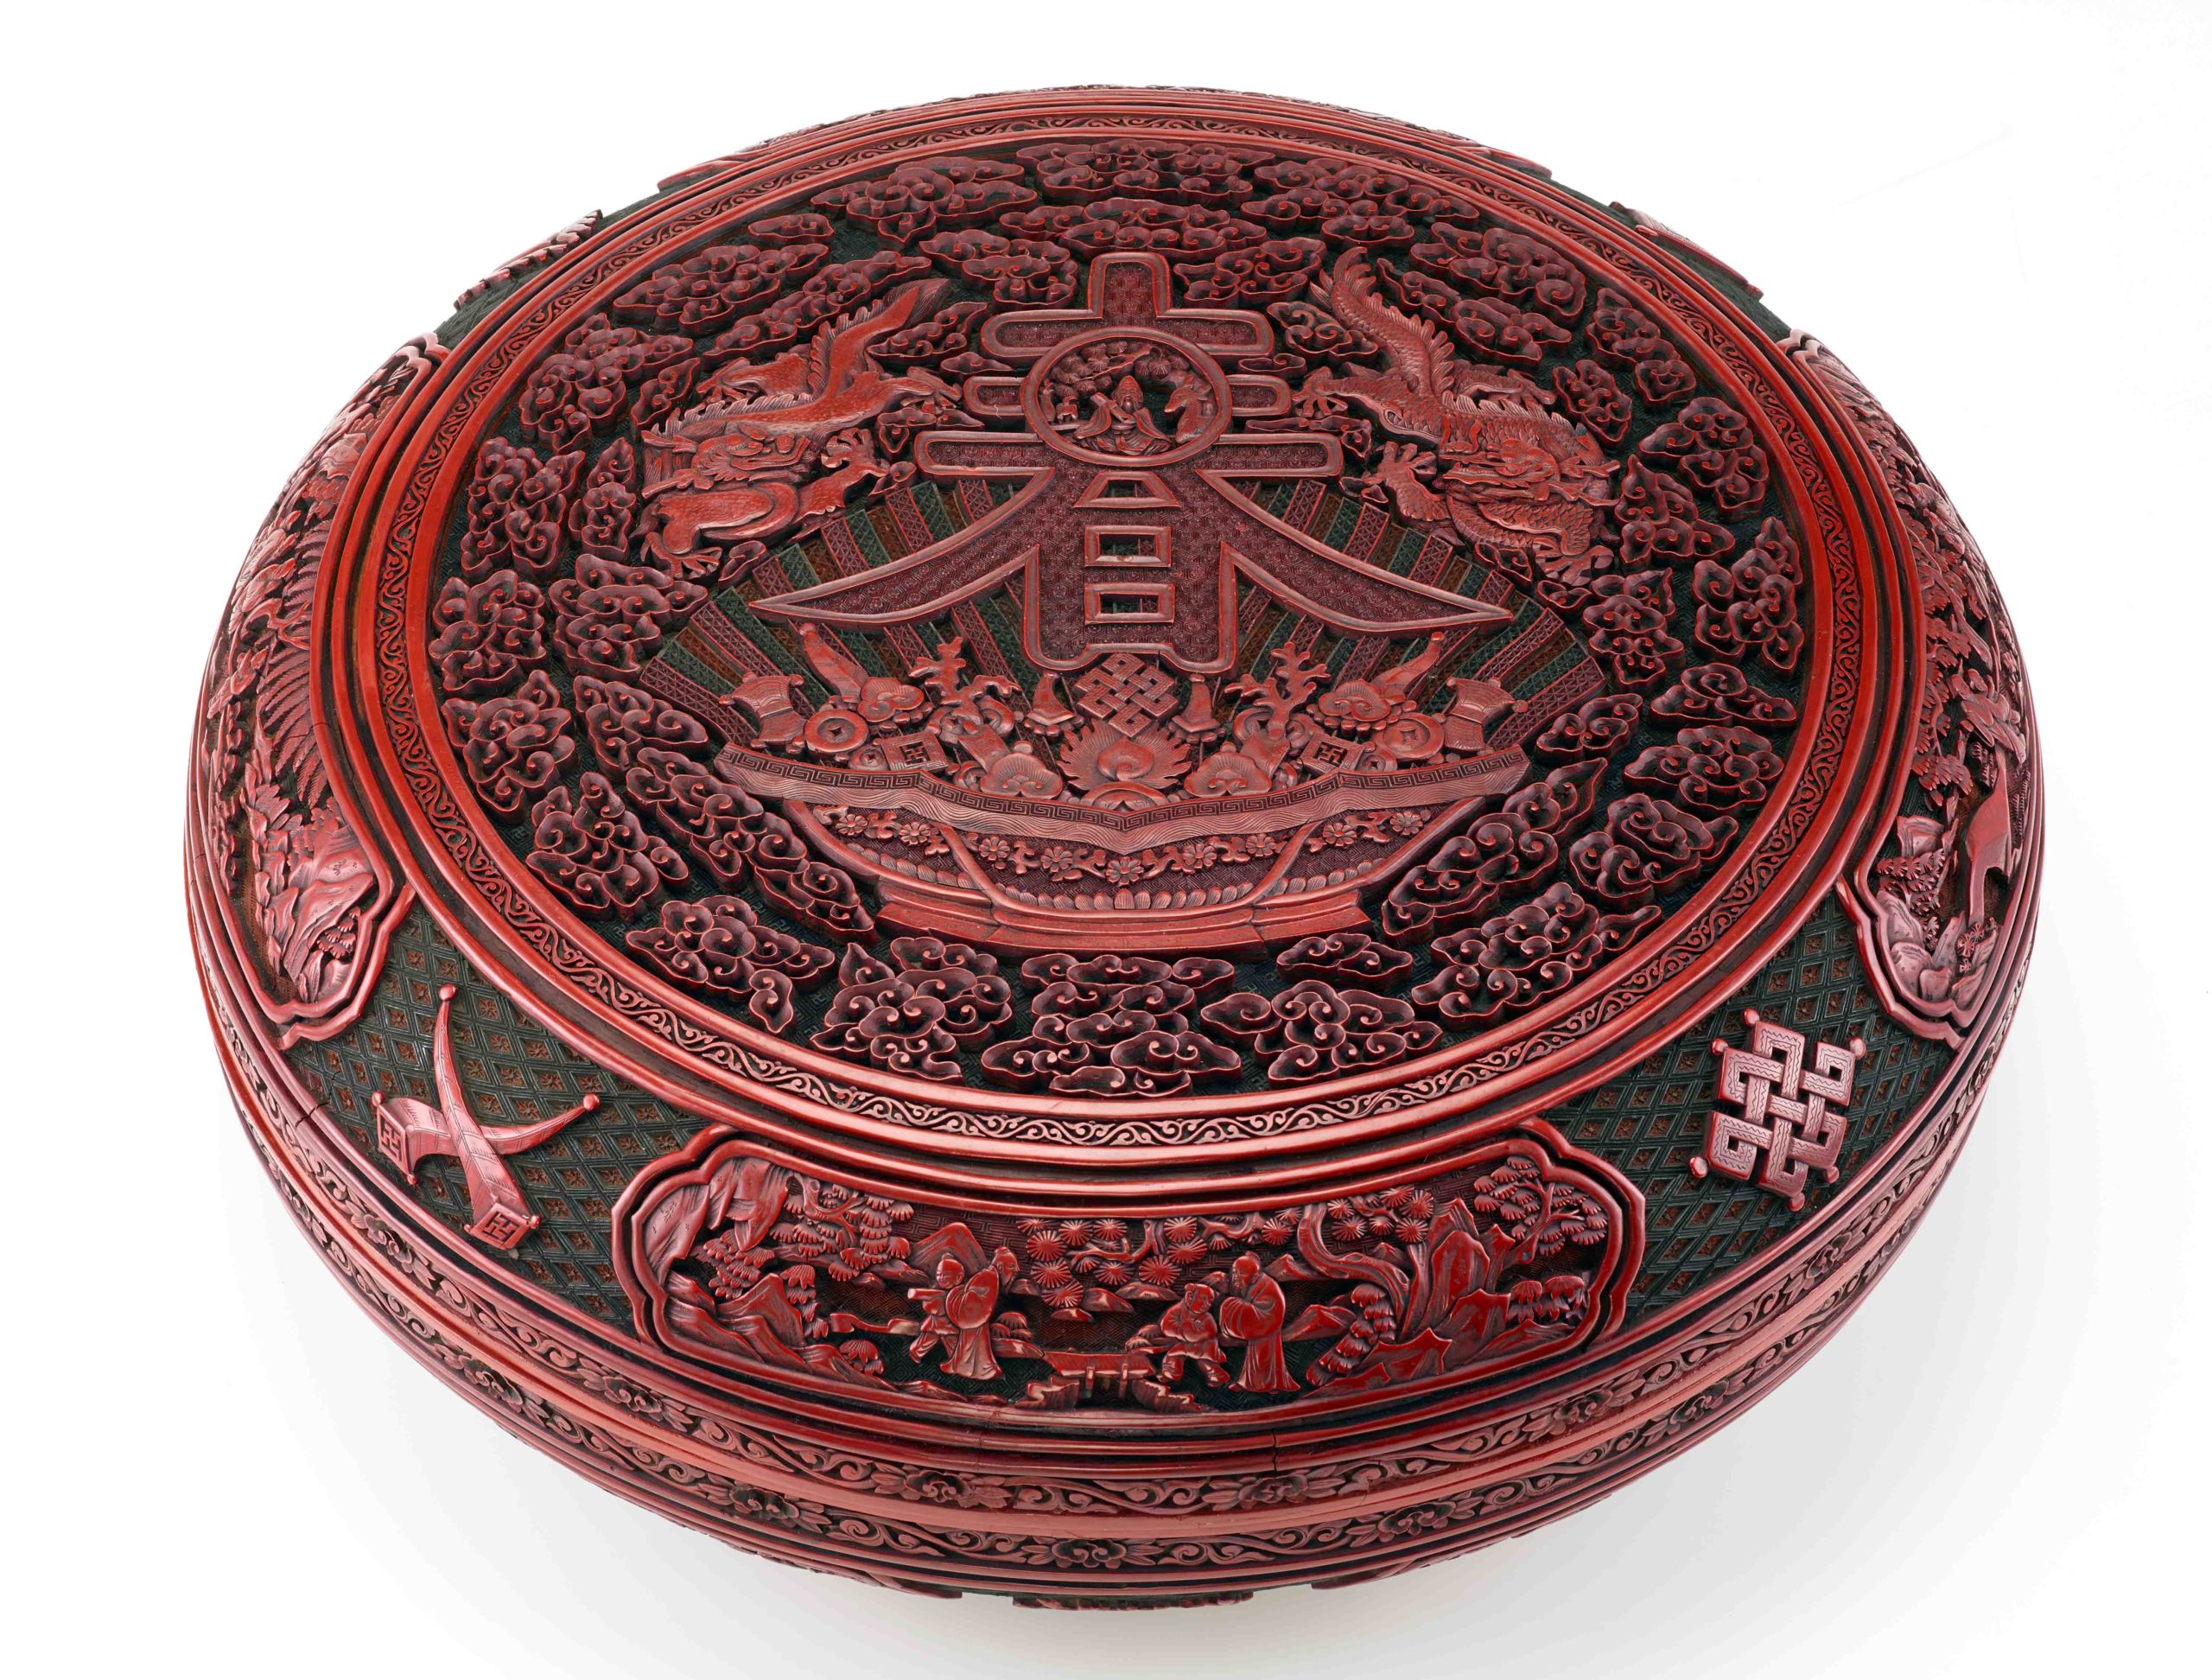 Treasure Box of Eternal Spring and Longevity, Qing dynasty, Qianlong reign, 1736–95, carved red, green, and yellow lacquer on wood core, China, 16.5 x 44 x 44 cm (Freer Gallery of Art, Smithsonian Institution, Washington, DC: Purchase — Charles Lang Freer Endowment, F1990.15a-e)